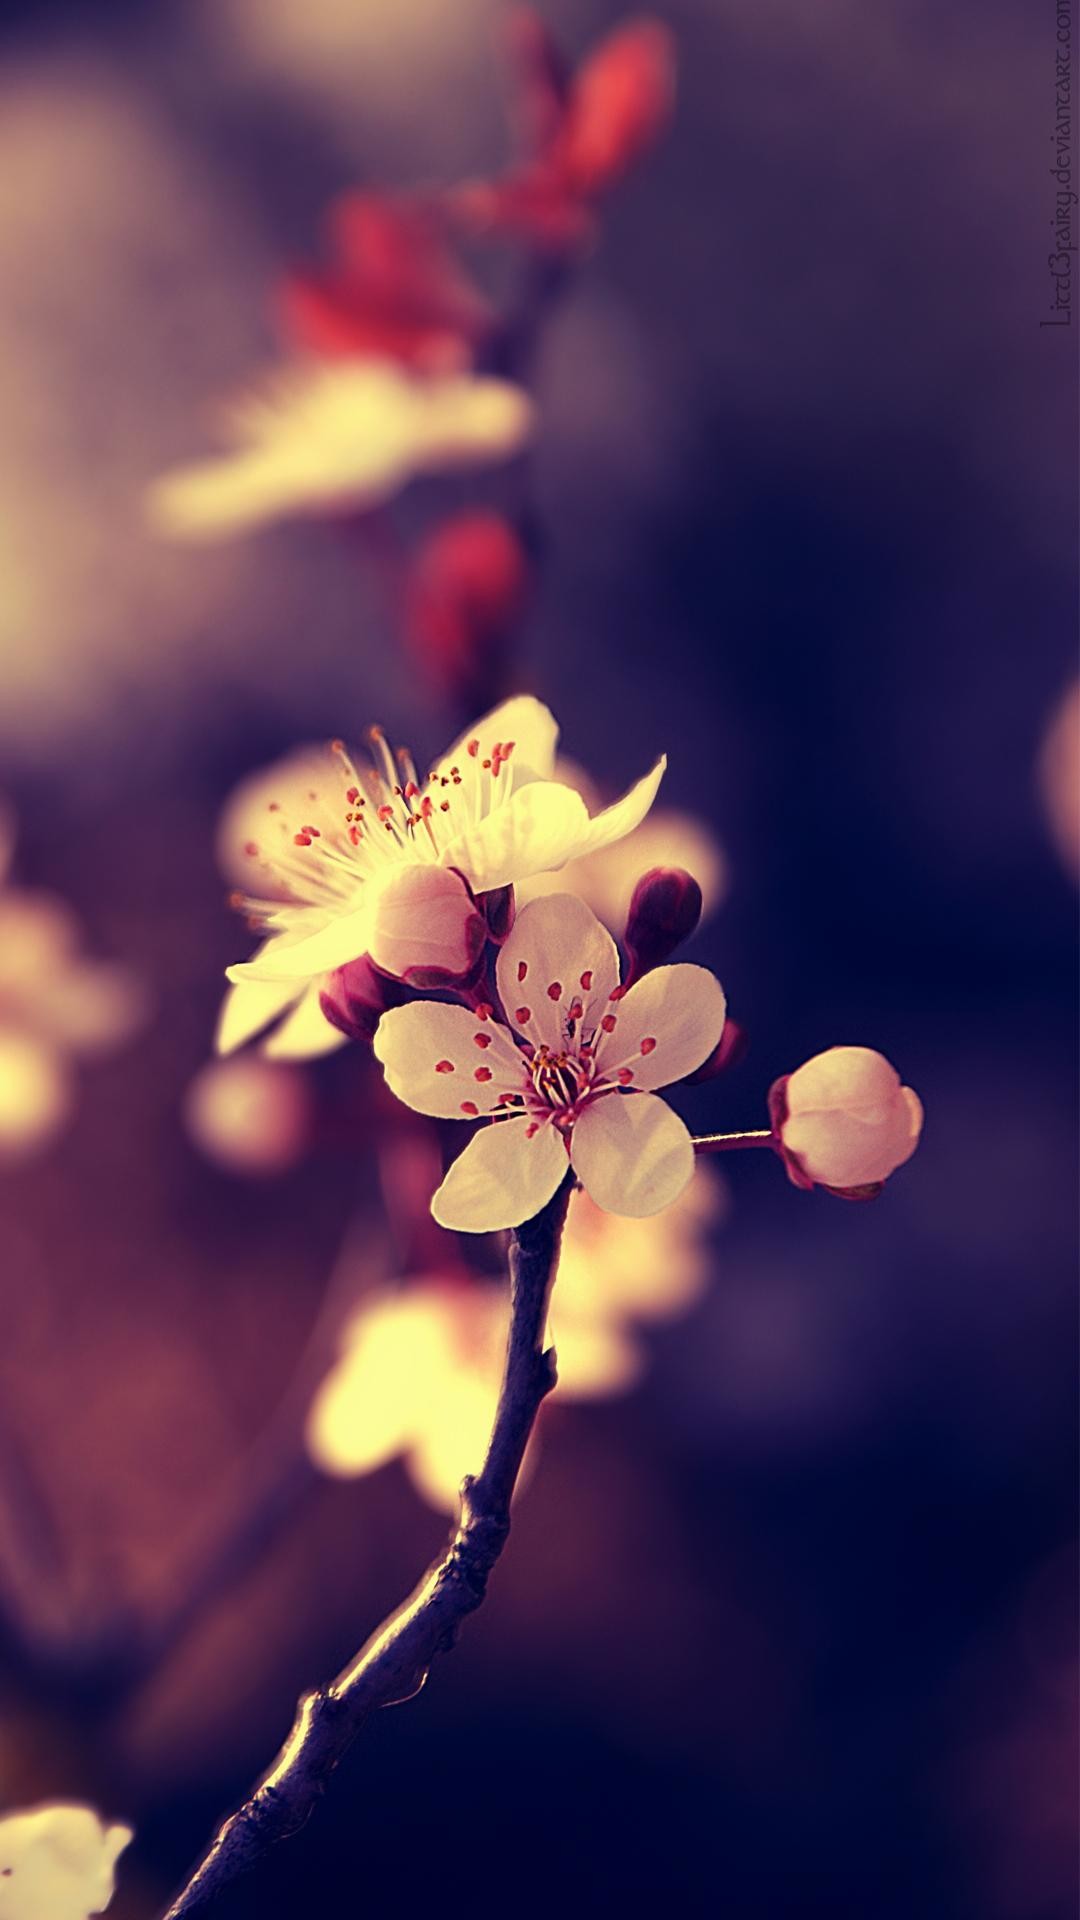 1080x1920 http-www-vactualpapers-com-gallery-beautiful-flowers-mobile-